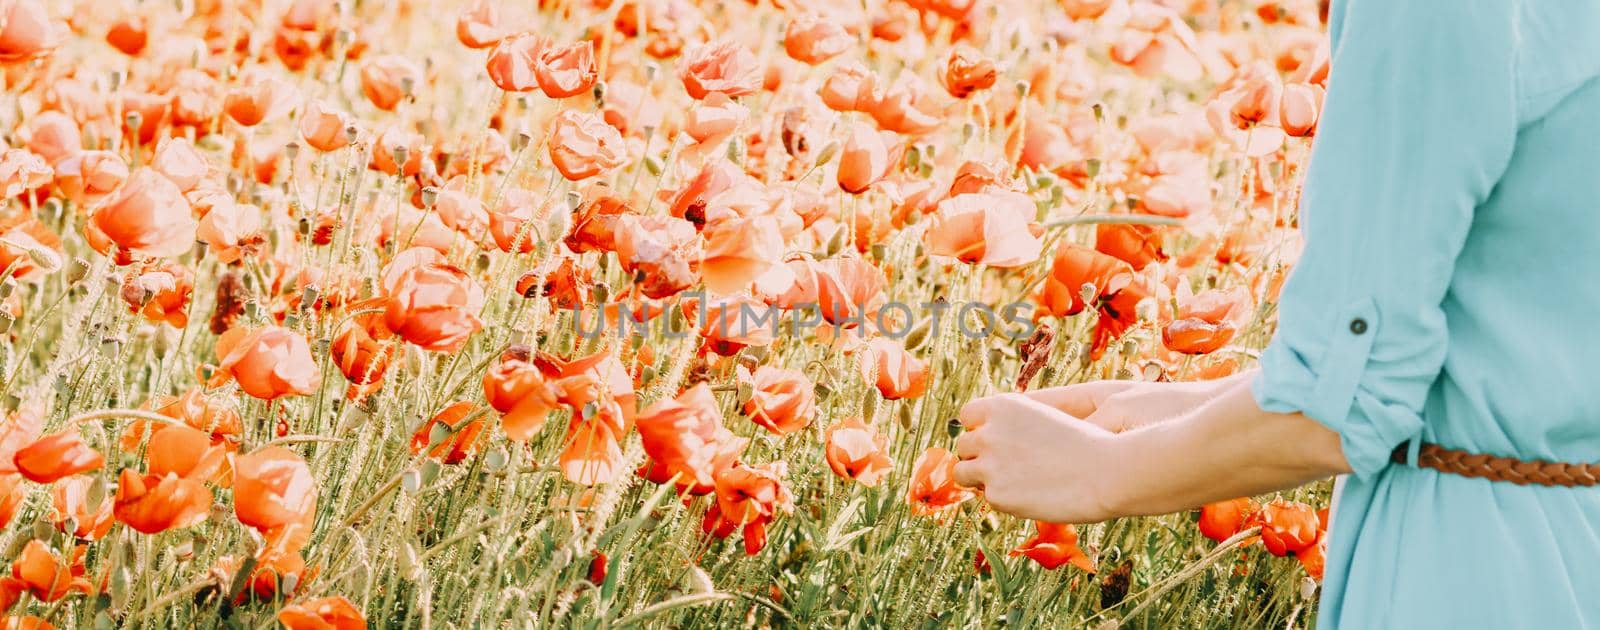 Unrecognizable woman picking red poppies flowers in meadow, view of hands.